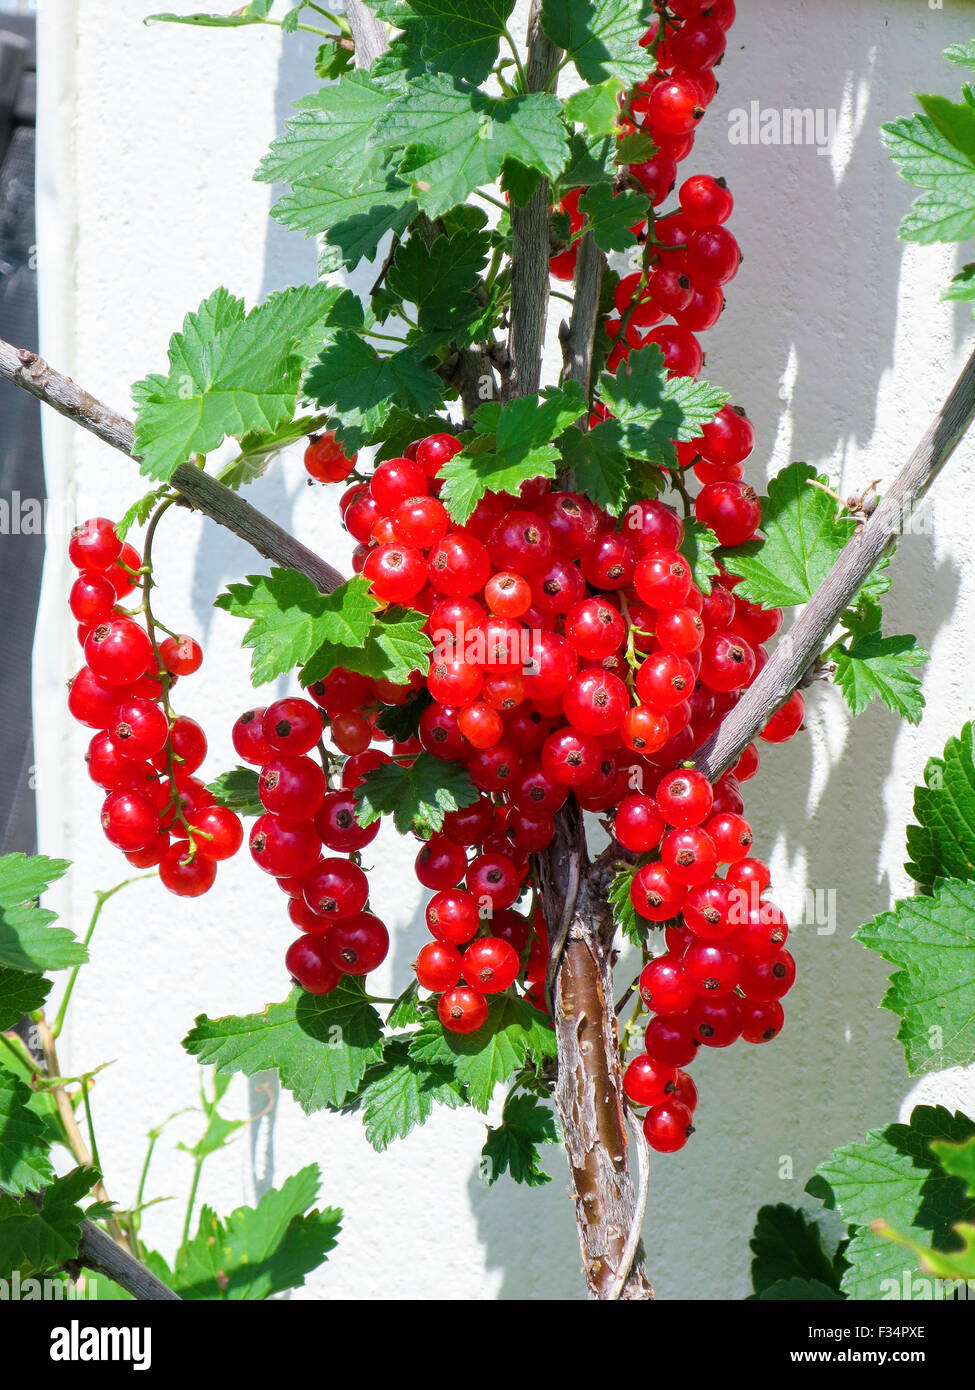 Strings of ripe red currant berries a.k.a. redcurrants. Currants are high in vitamin C, up to 40% of daily requirements. Stock Photo